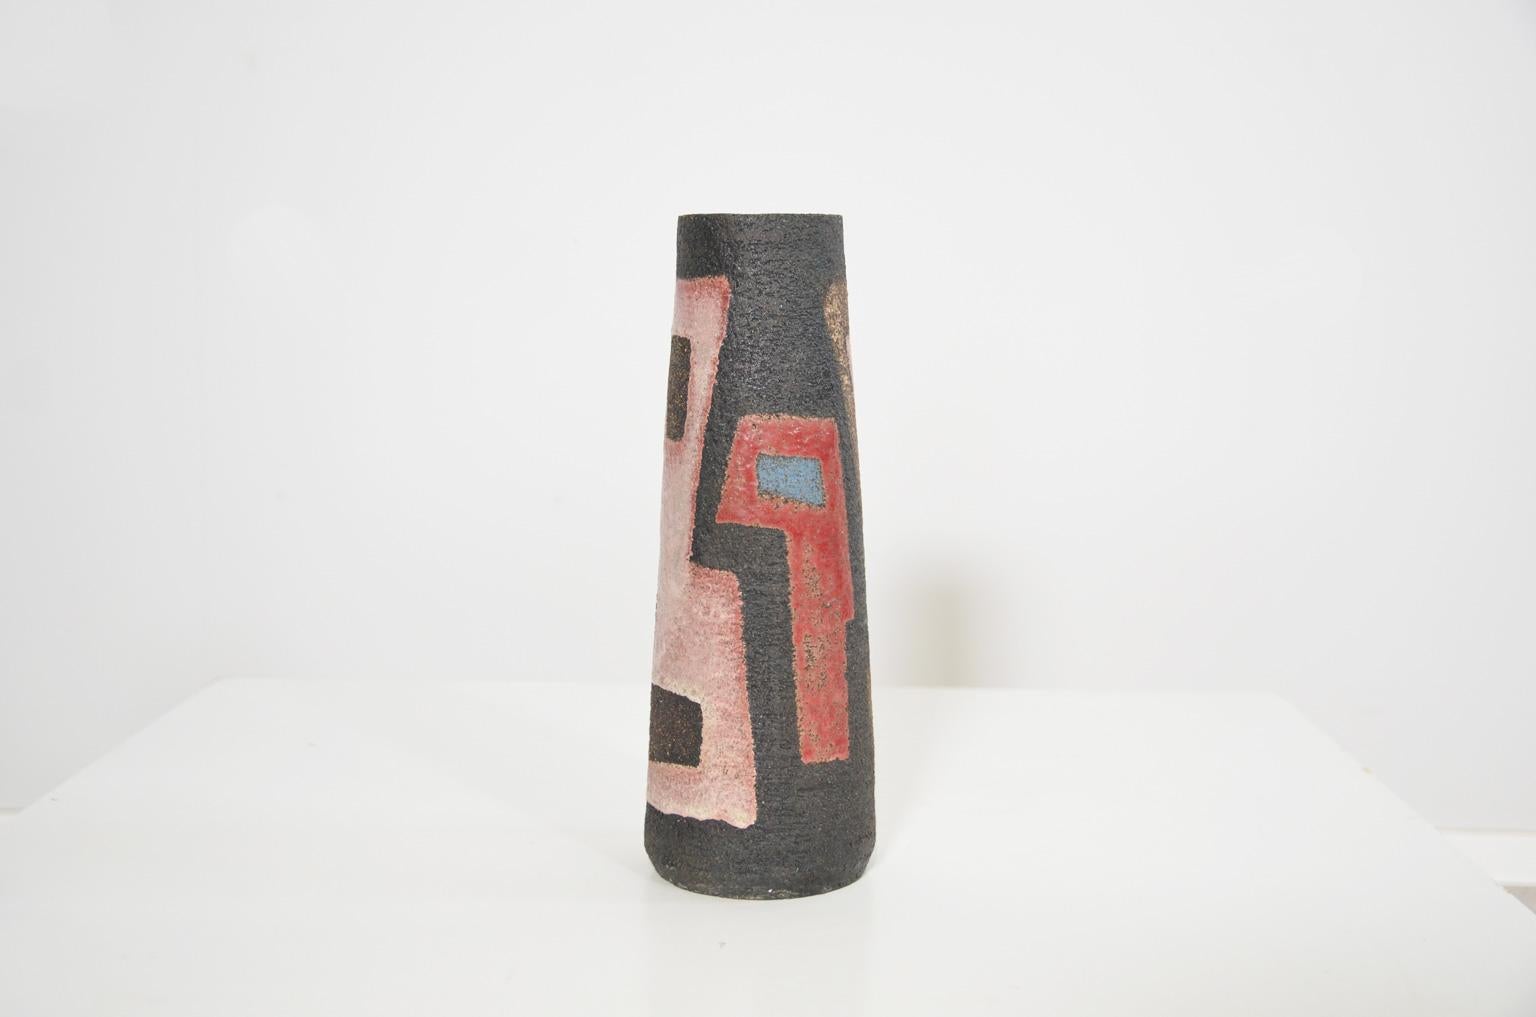 Robust unica vase in the colors red, rose, blue and dark brown. Meindert Zaalberg strived for a pure form and structure in his work, and this vase is a good example of his vision on pottery.